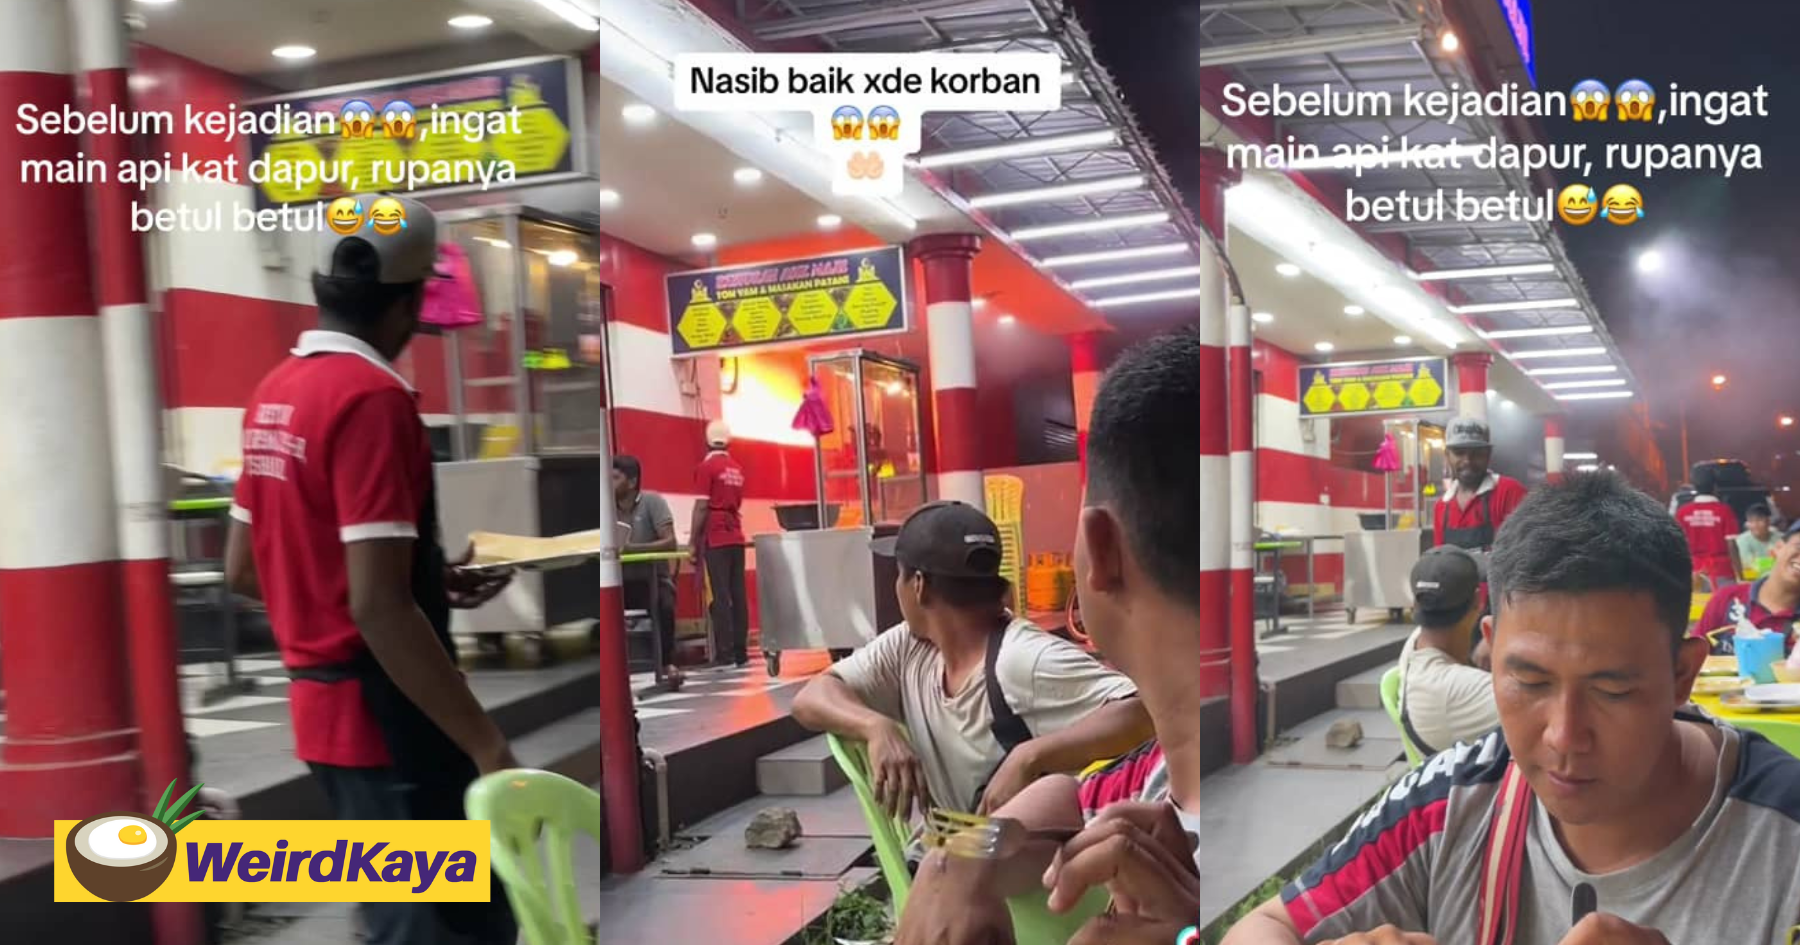 Viral video shows mamak staff serve customers calmly even while the kitchen catches fire | weirdkaya